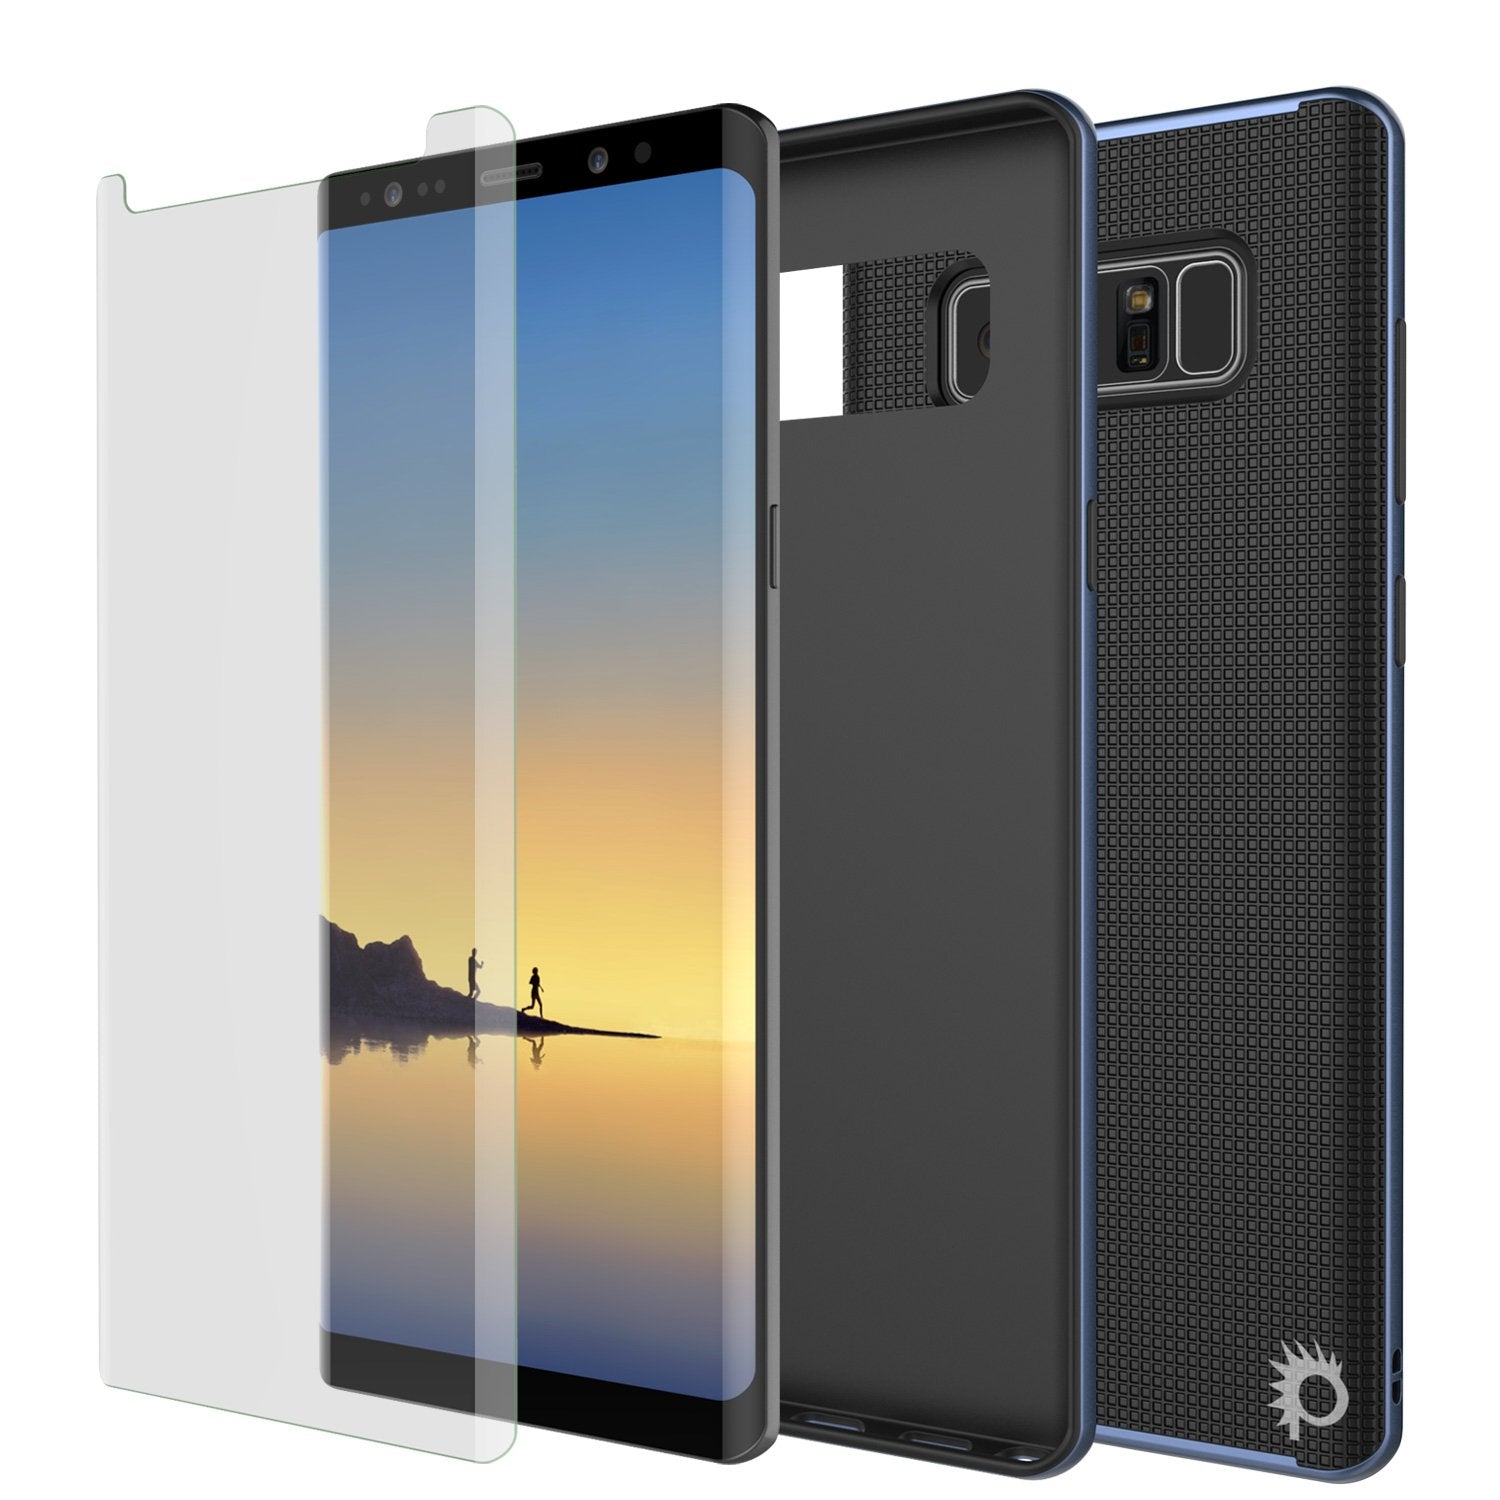 Galaxy Note 8 Case, PunkCase [Stealth Series] Hybrid 3-Piece Shockproof Dual Layer Cover [Non-Slip] [Soft TPU + PC Bumper] with PUNKSHIELD Screen Protector for Samsung Note 8 [Navy Blue] - PunkCase NZ